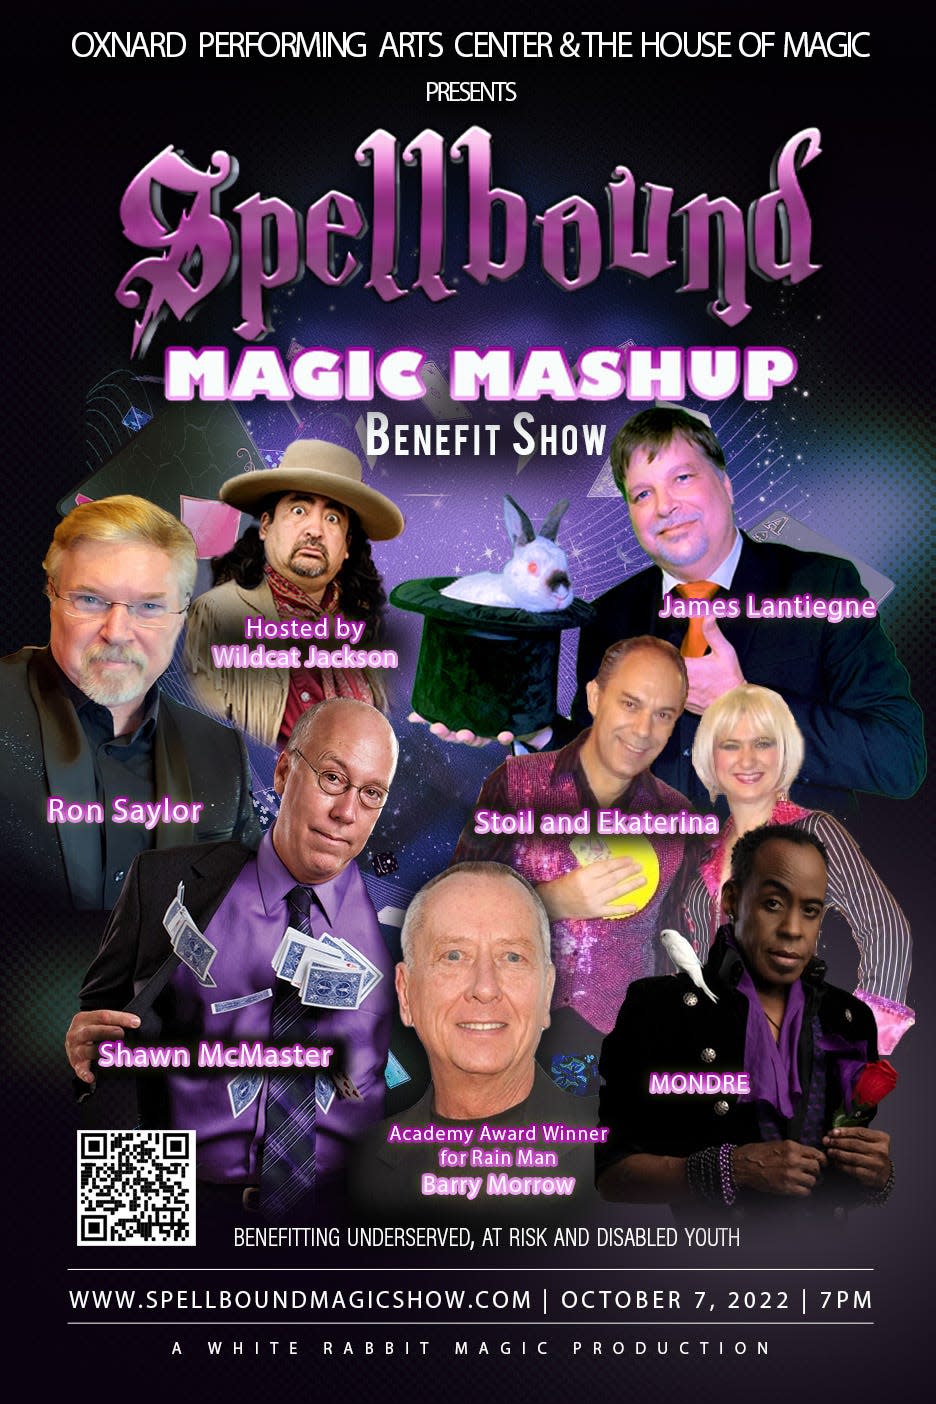 A poster for Friday's SPELLBOUND Magic Mashup Benefit Show at the Oxnard Performing Arts Center